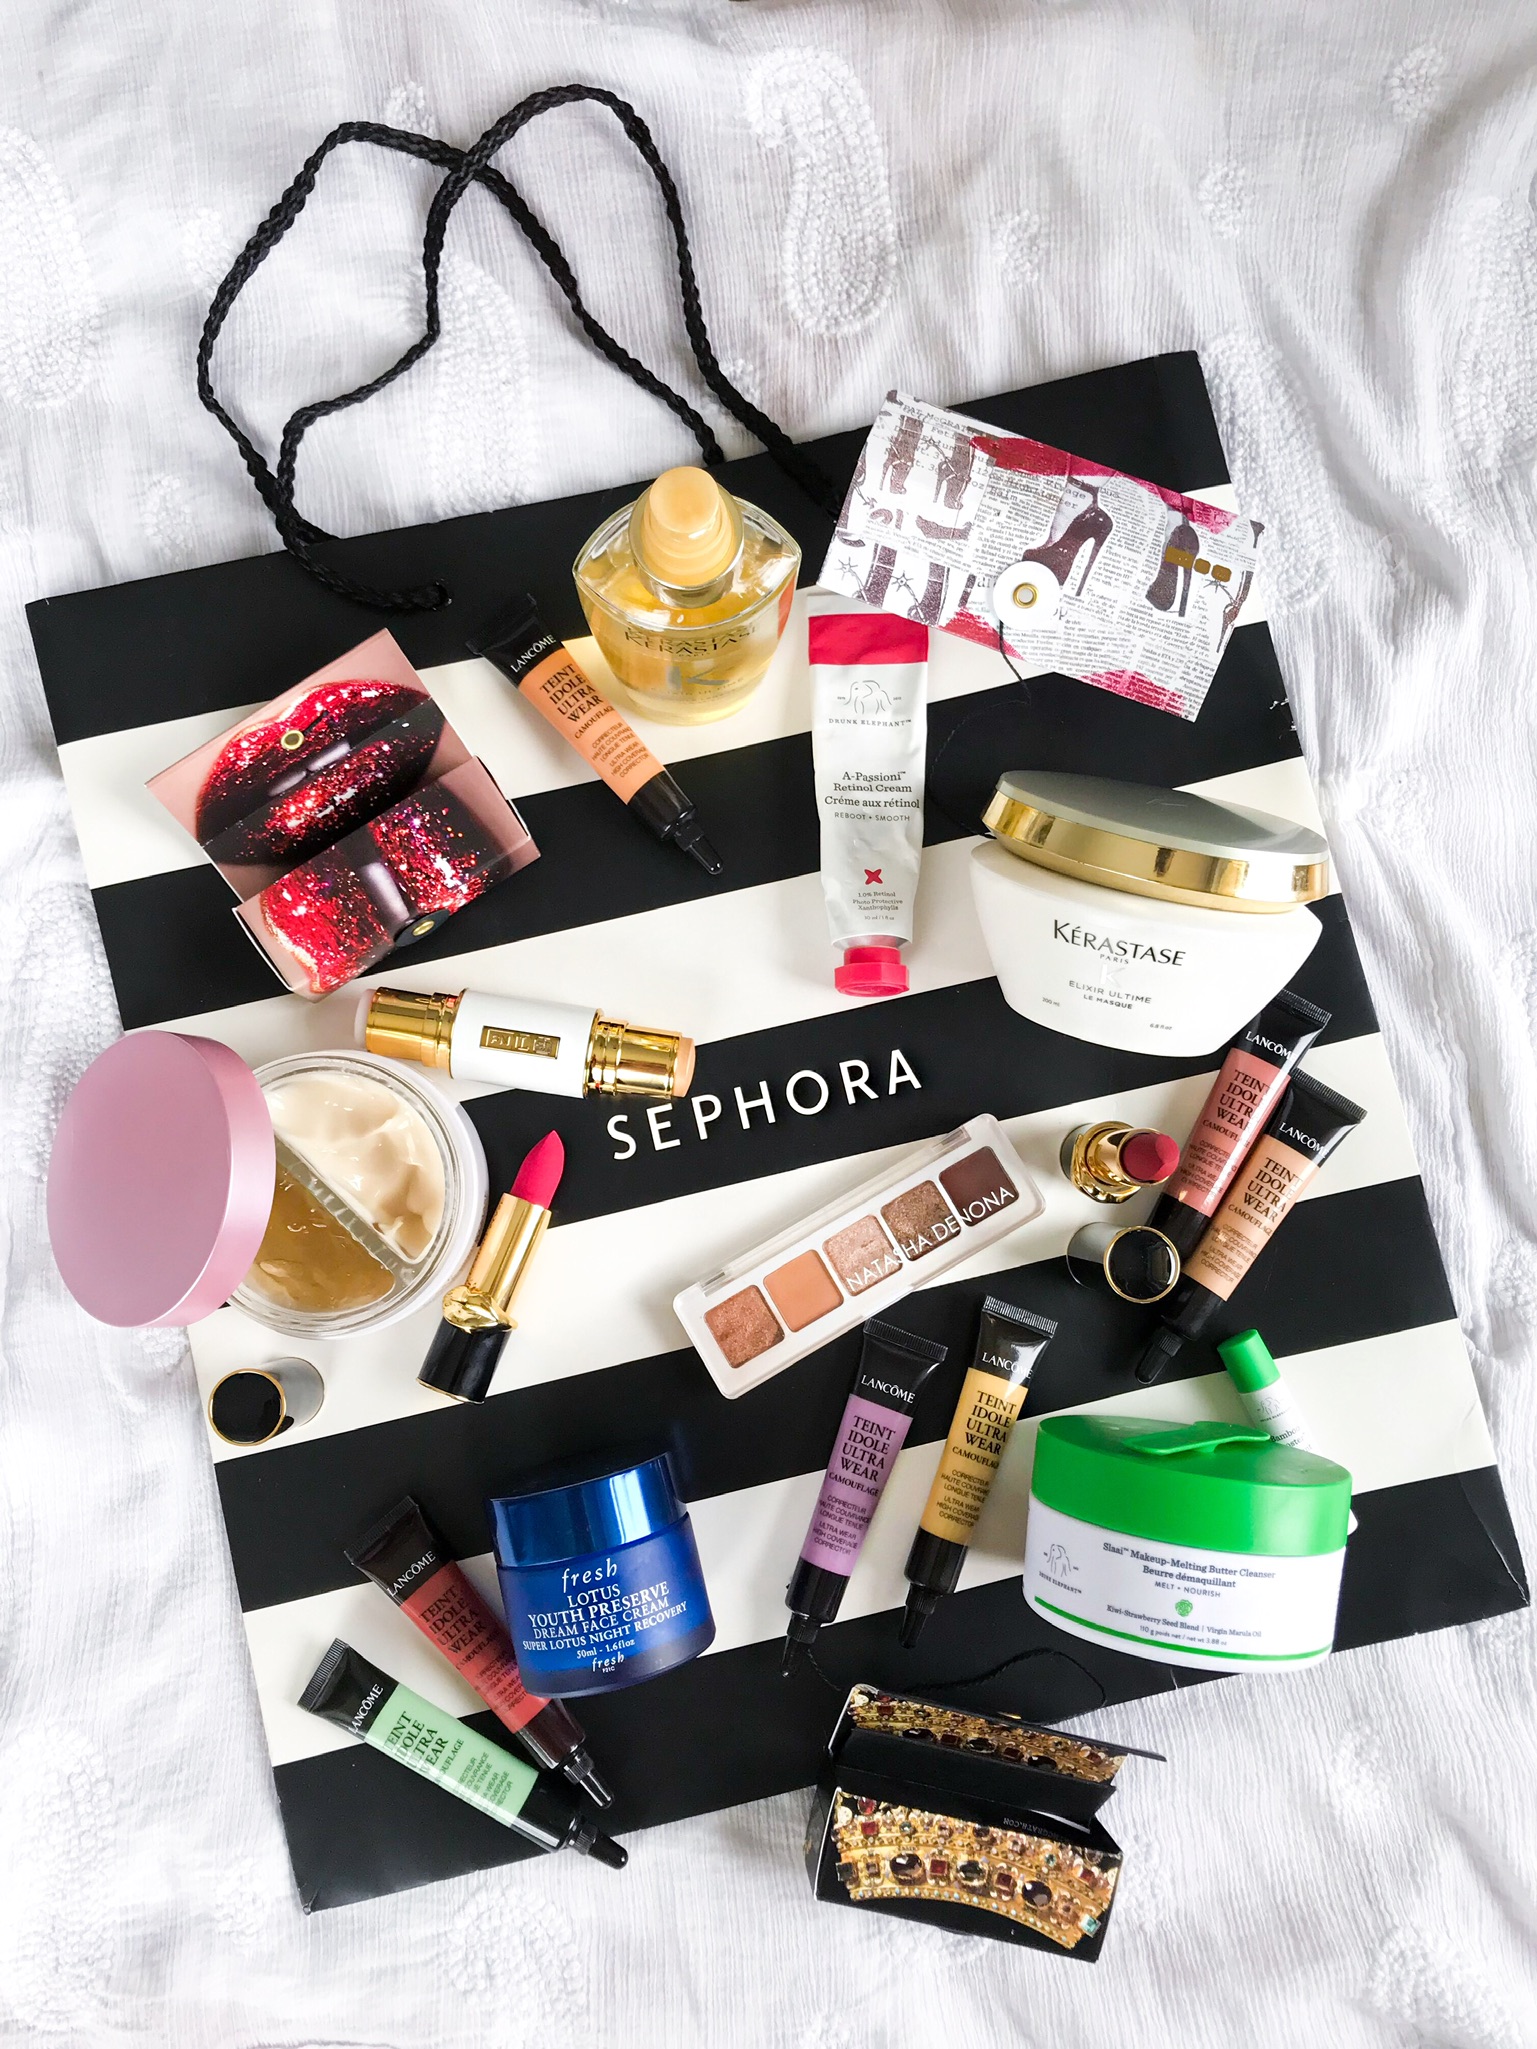 Sephora SemiAnnual VIB Sale 10 NEW Products to Add To Your Cart